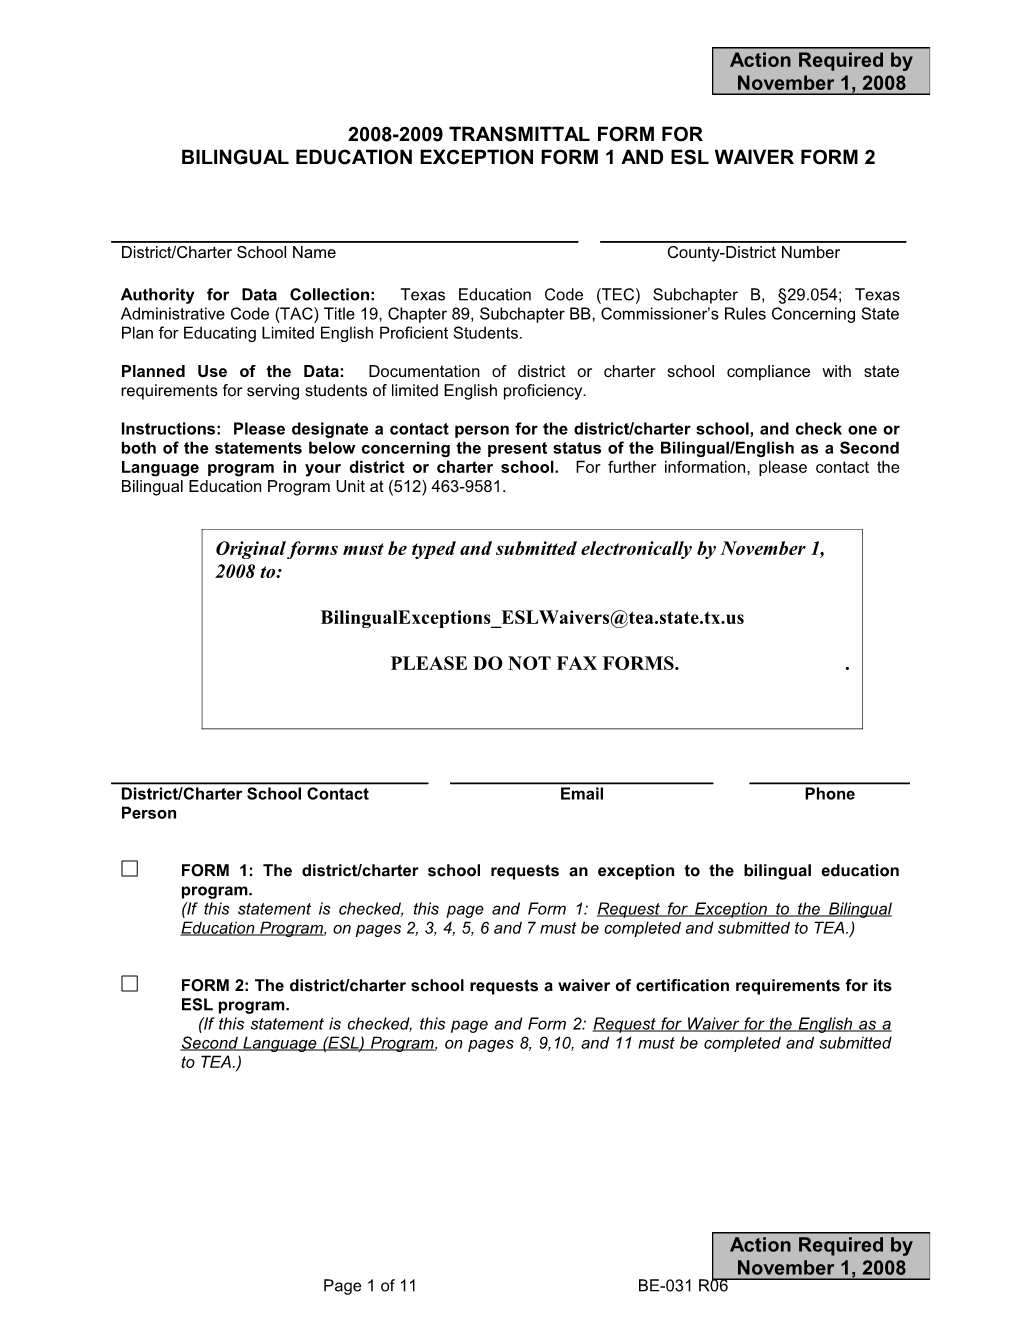 Bilingual Exceptionsesl Waiver Transmittal Forms